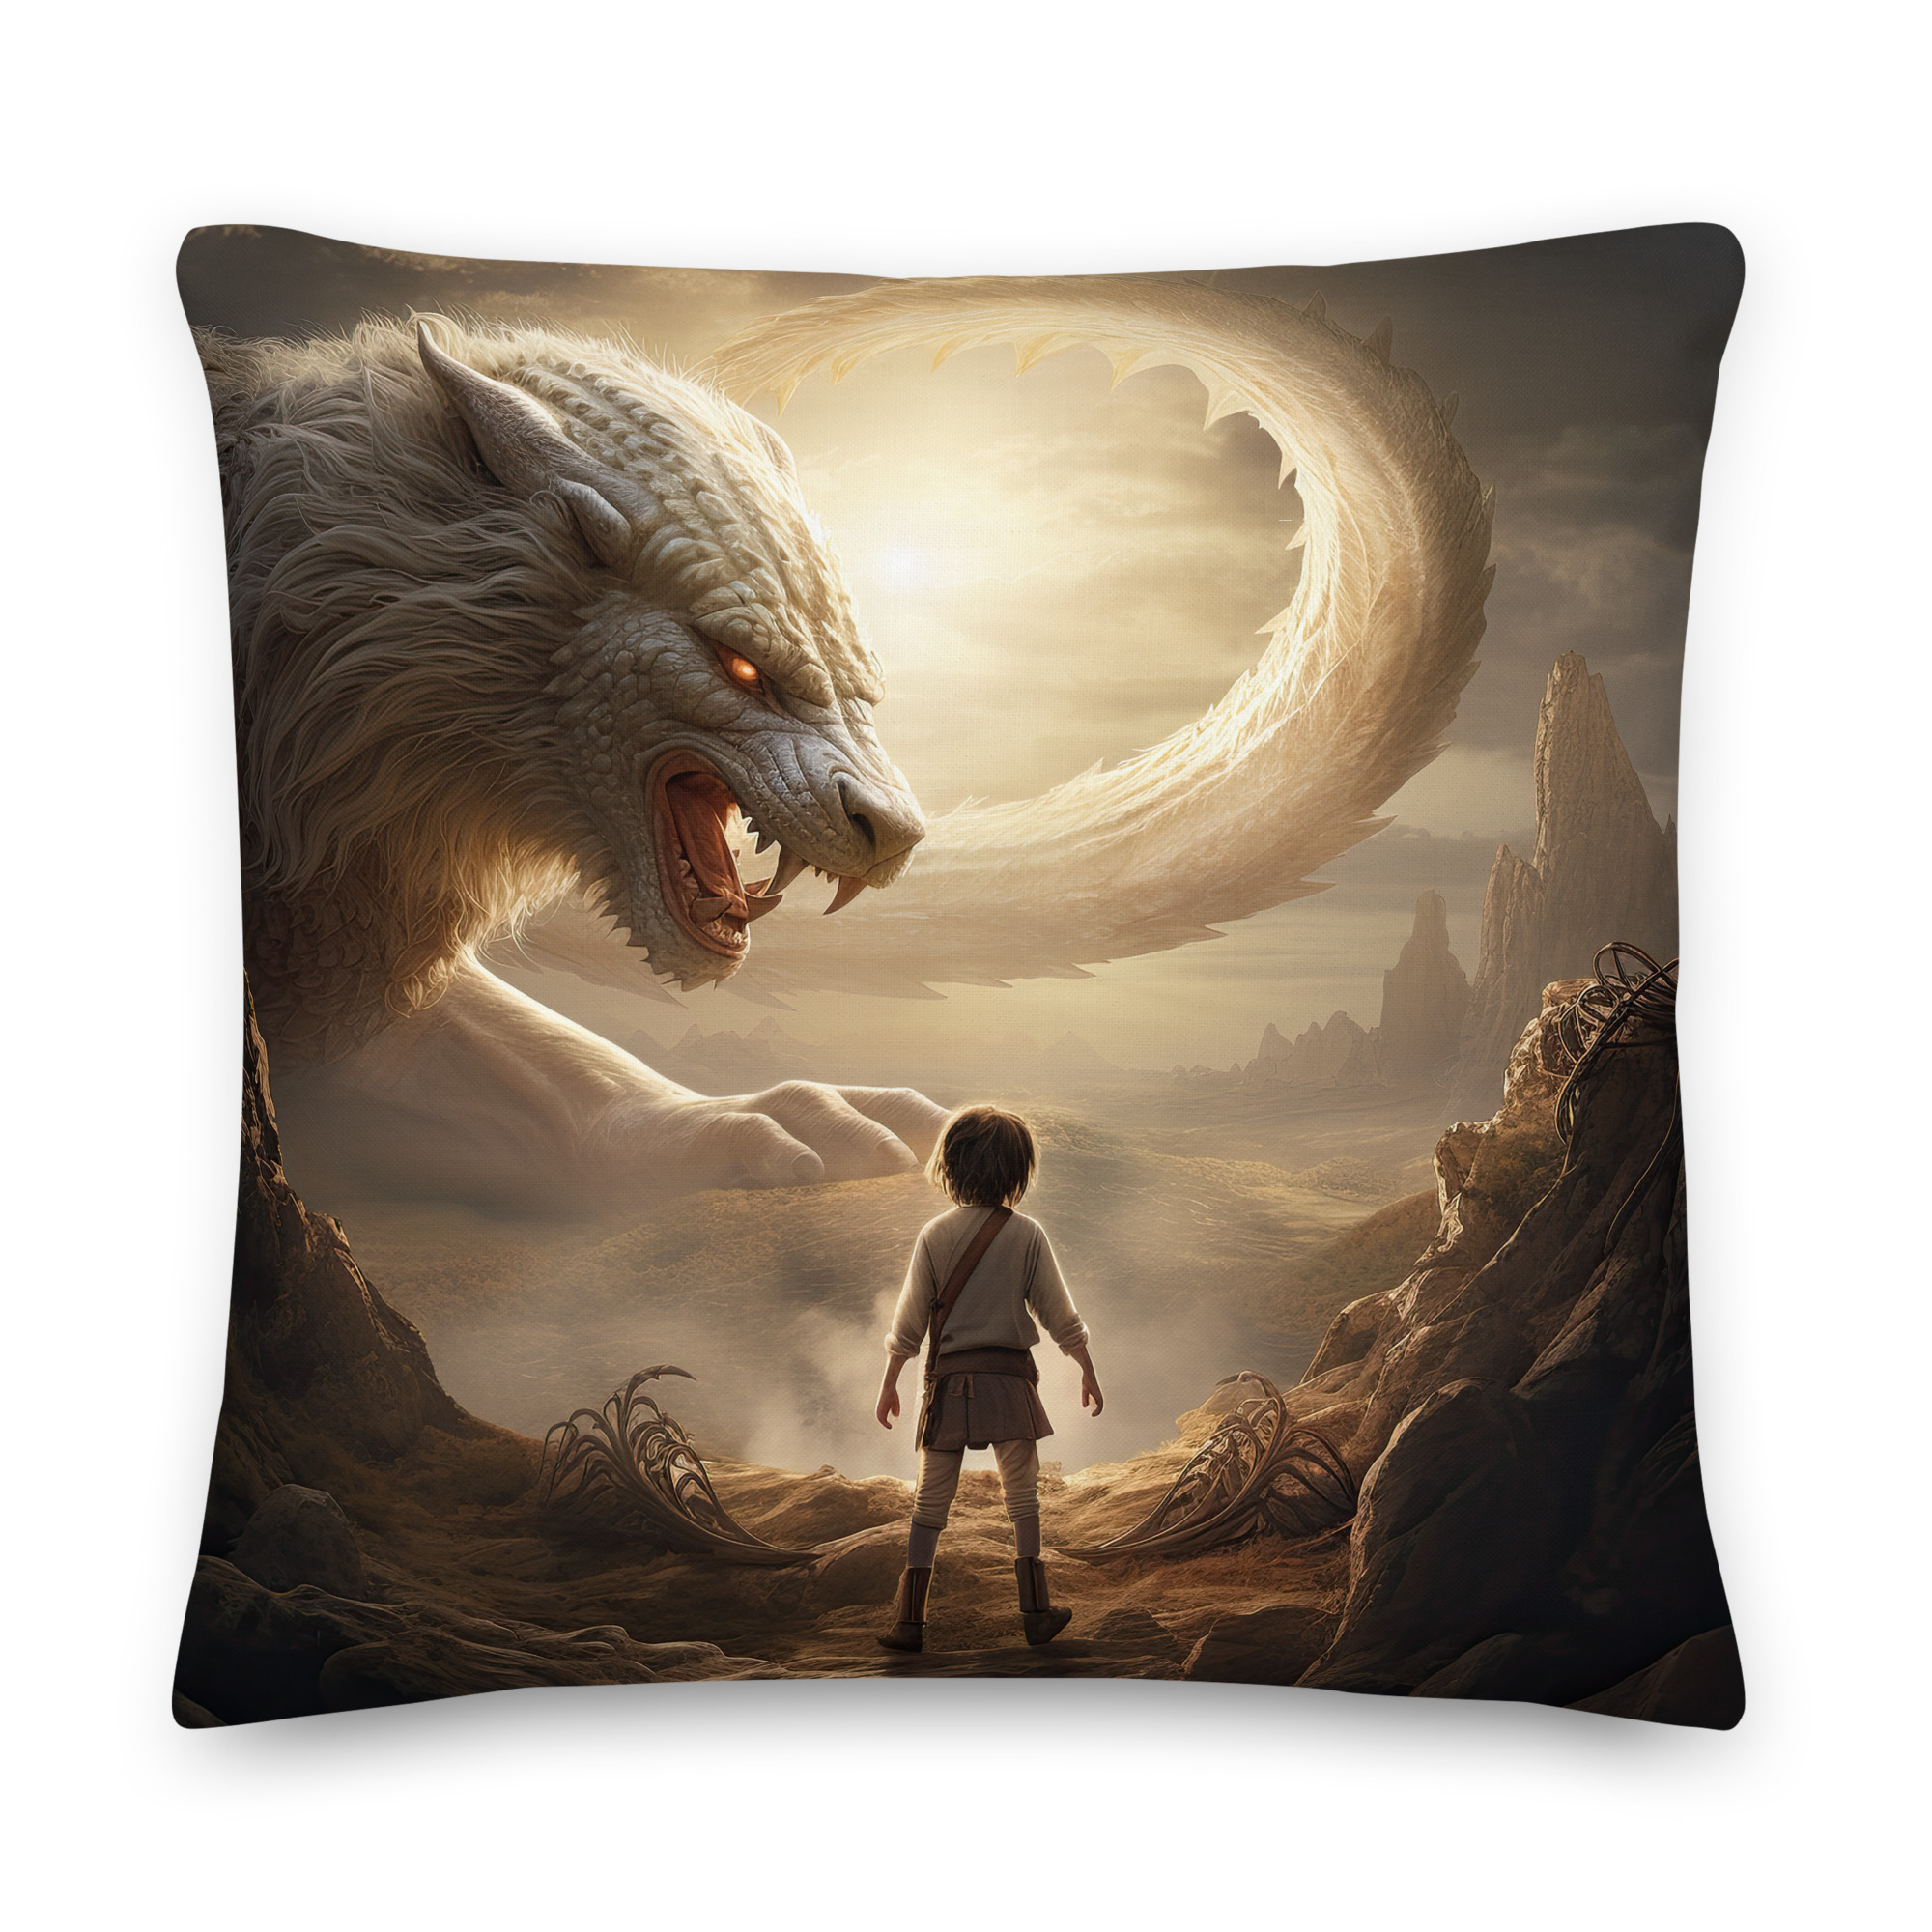 The Boy and the Chimera Throw Pillow - 22×22